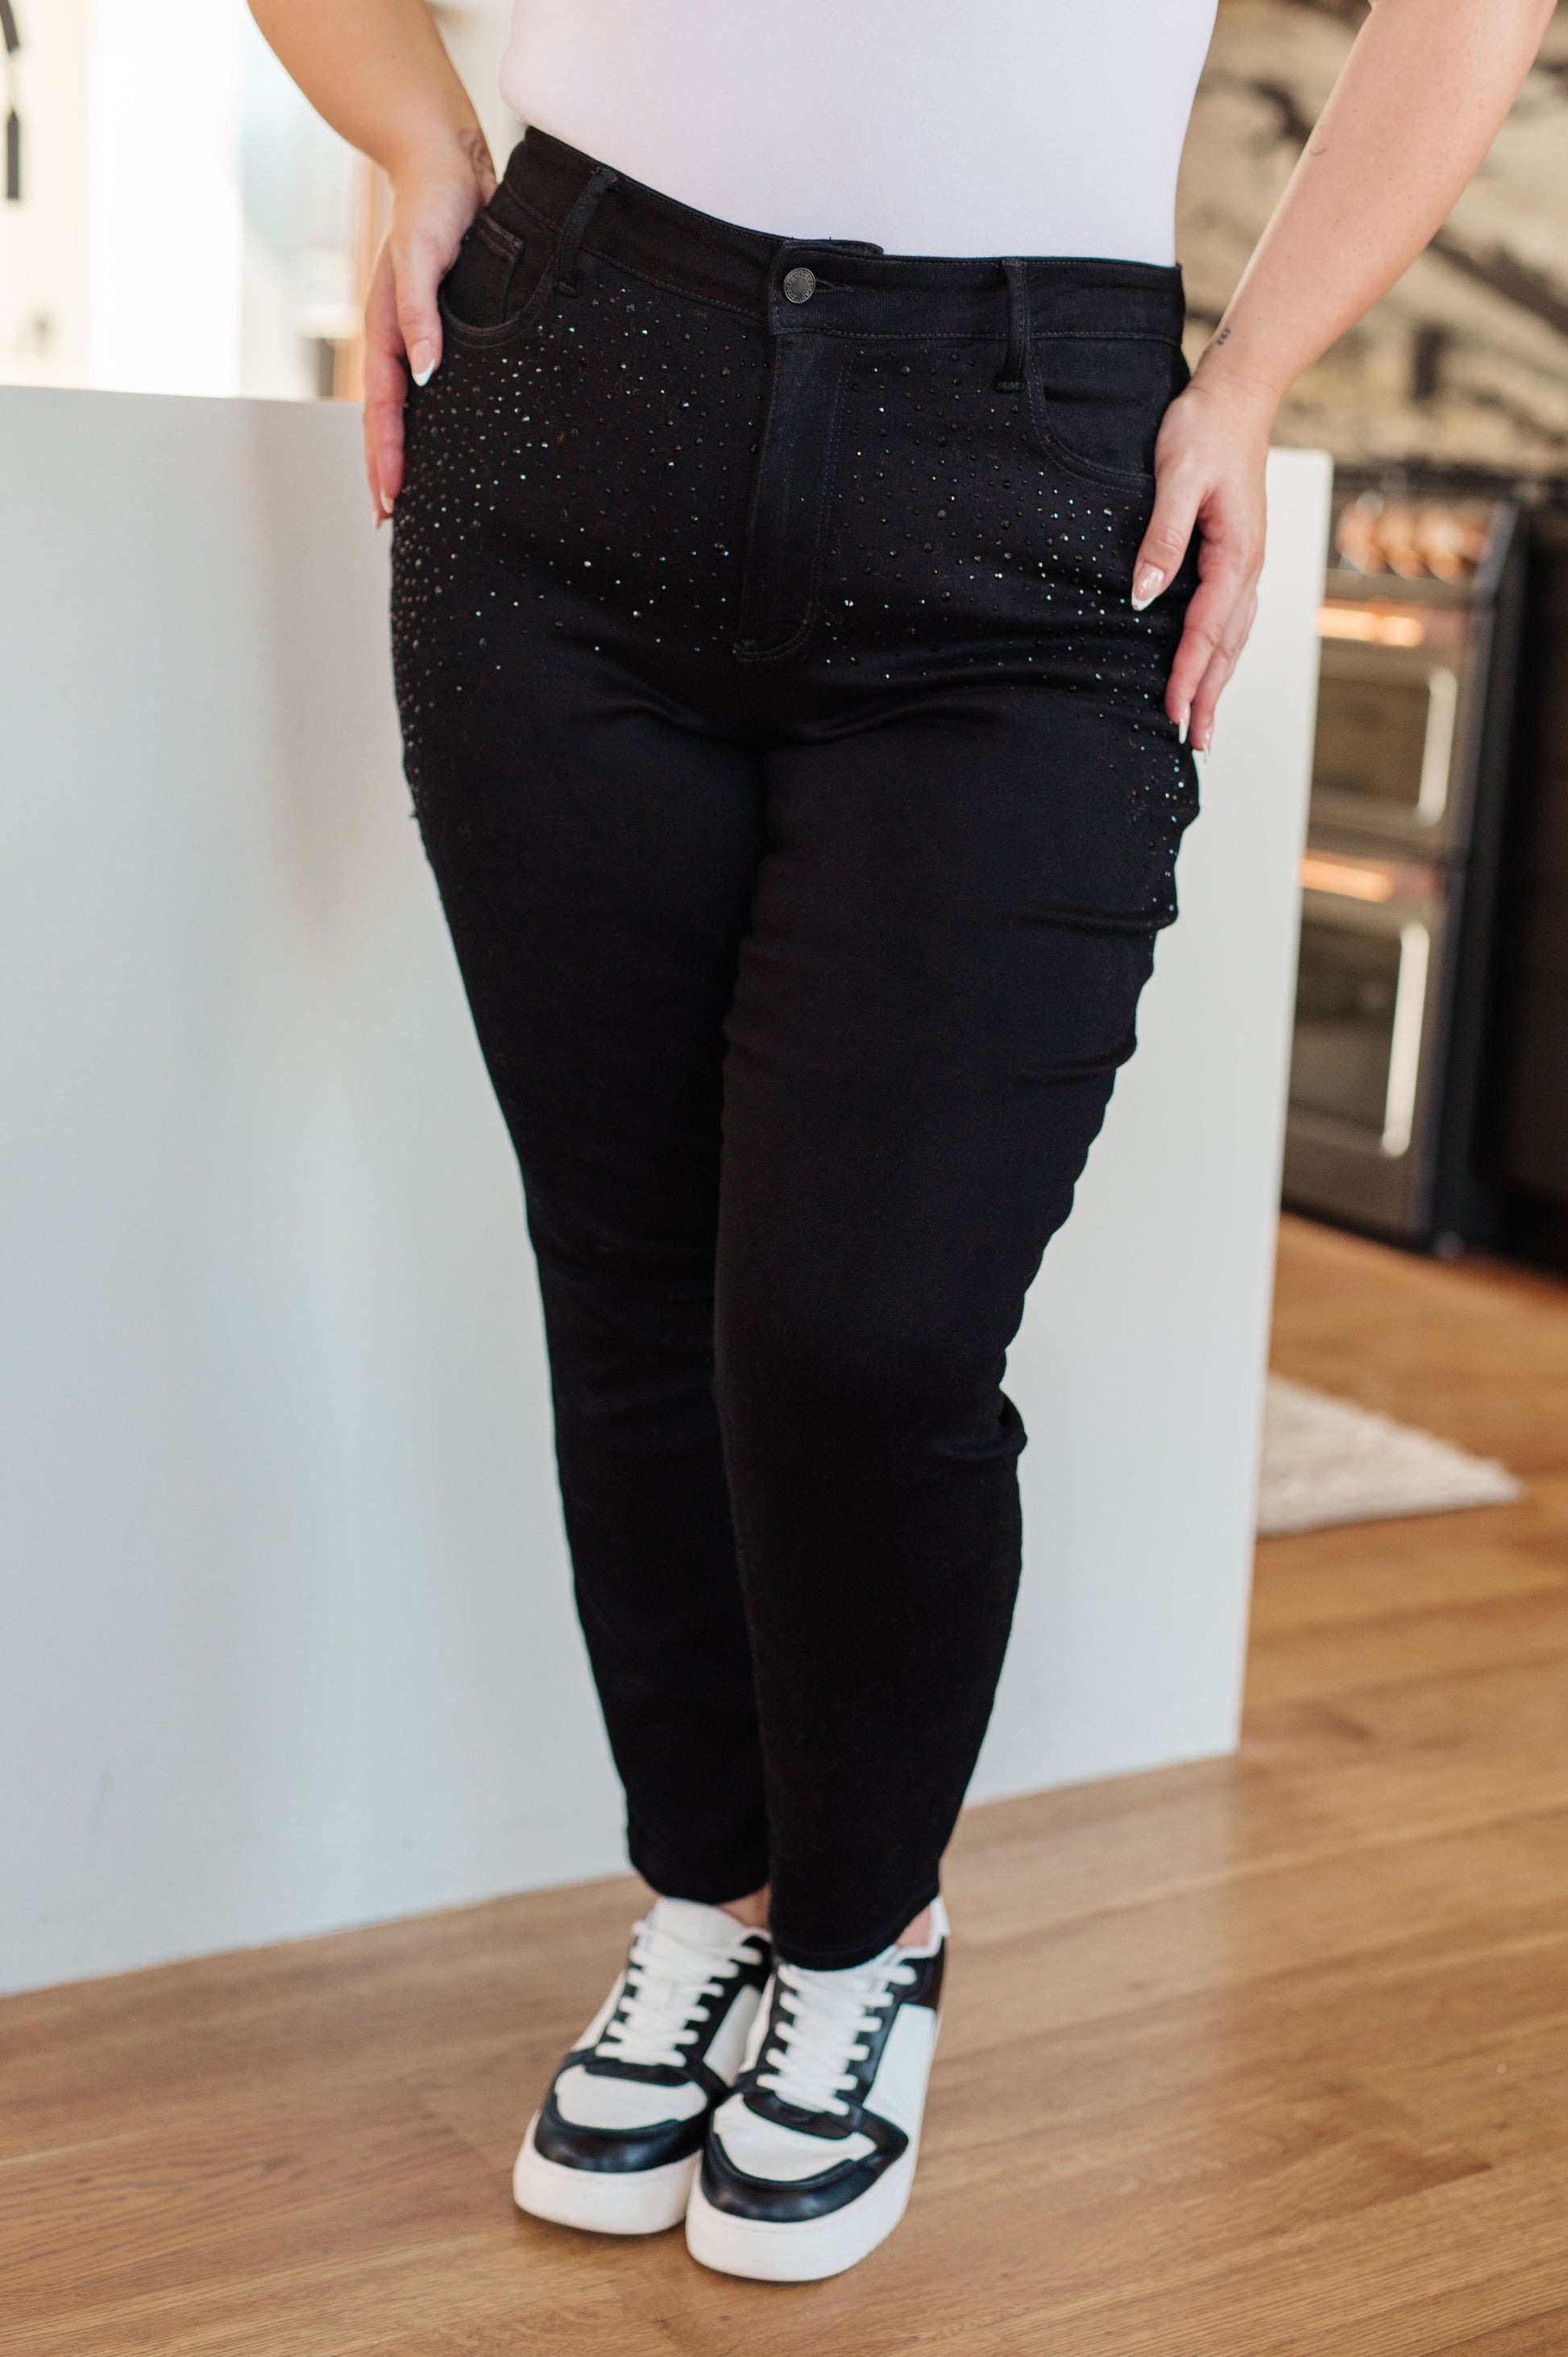 Unlock your unique style with Reese Rhinestone Slim Fit Jeans! Their high-rise fit and stretchy denim ensure comfort while the rhinestones add sophisticated flair. Bring out your inner sparkle and elevate your look!0 - 24W